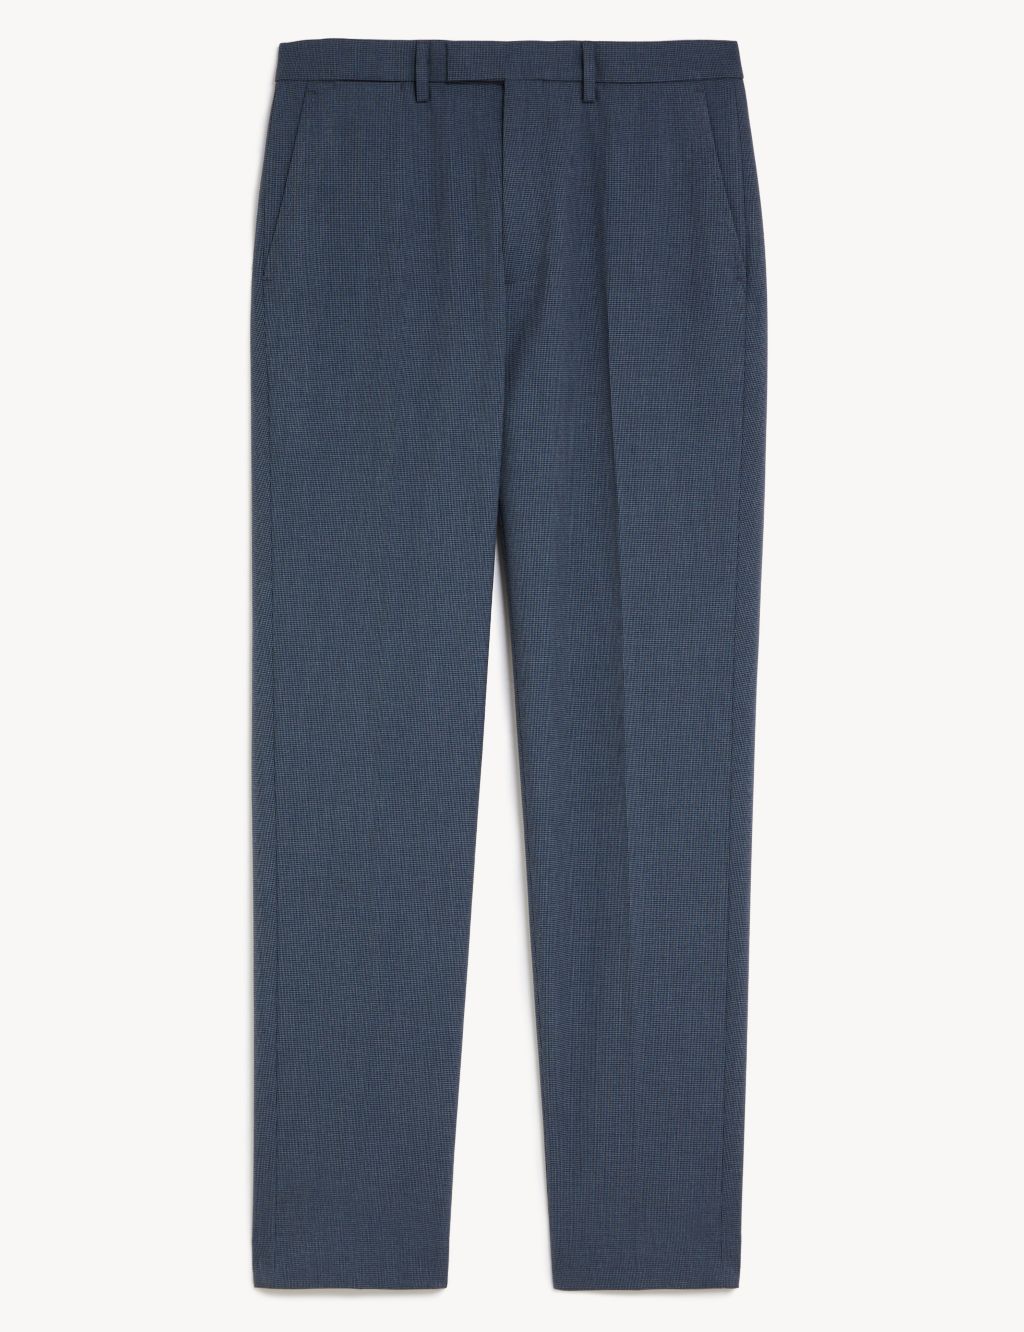 Puppytooth Stretch Trousers image 6